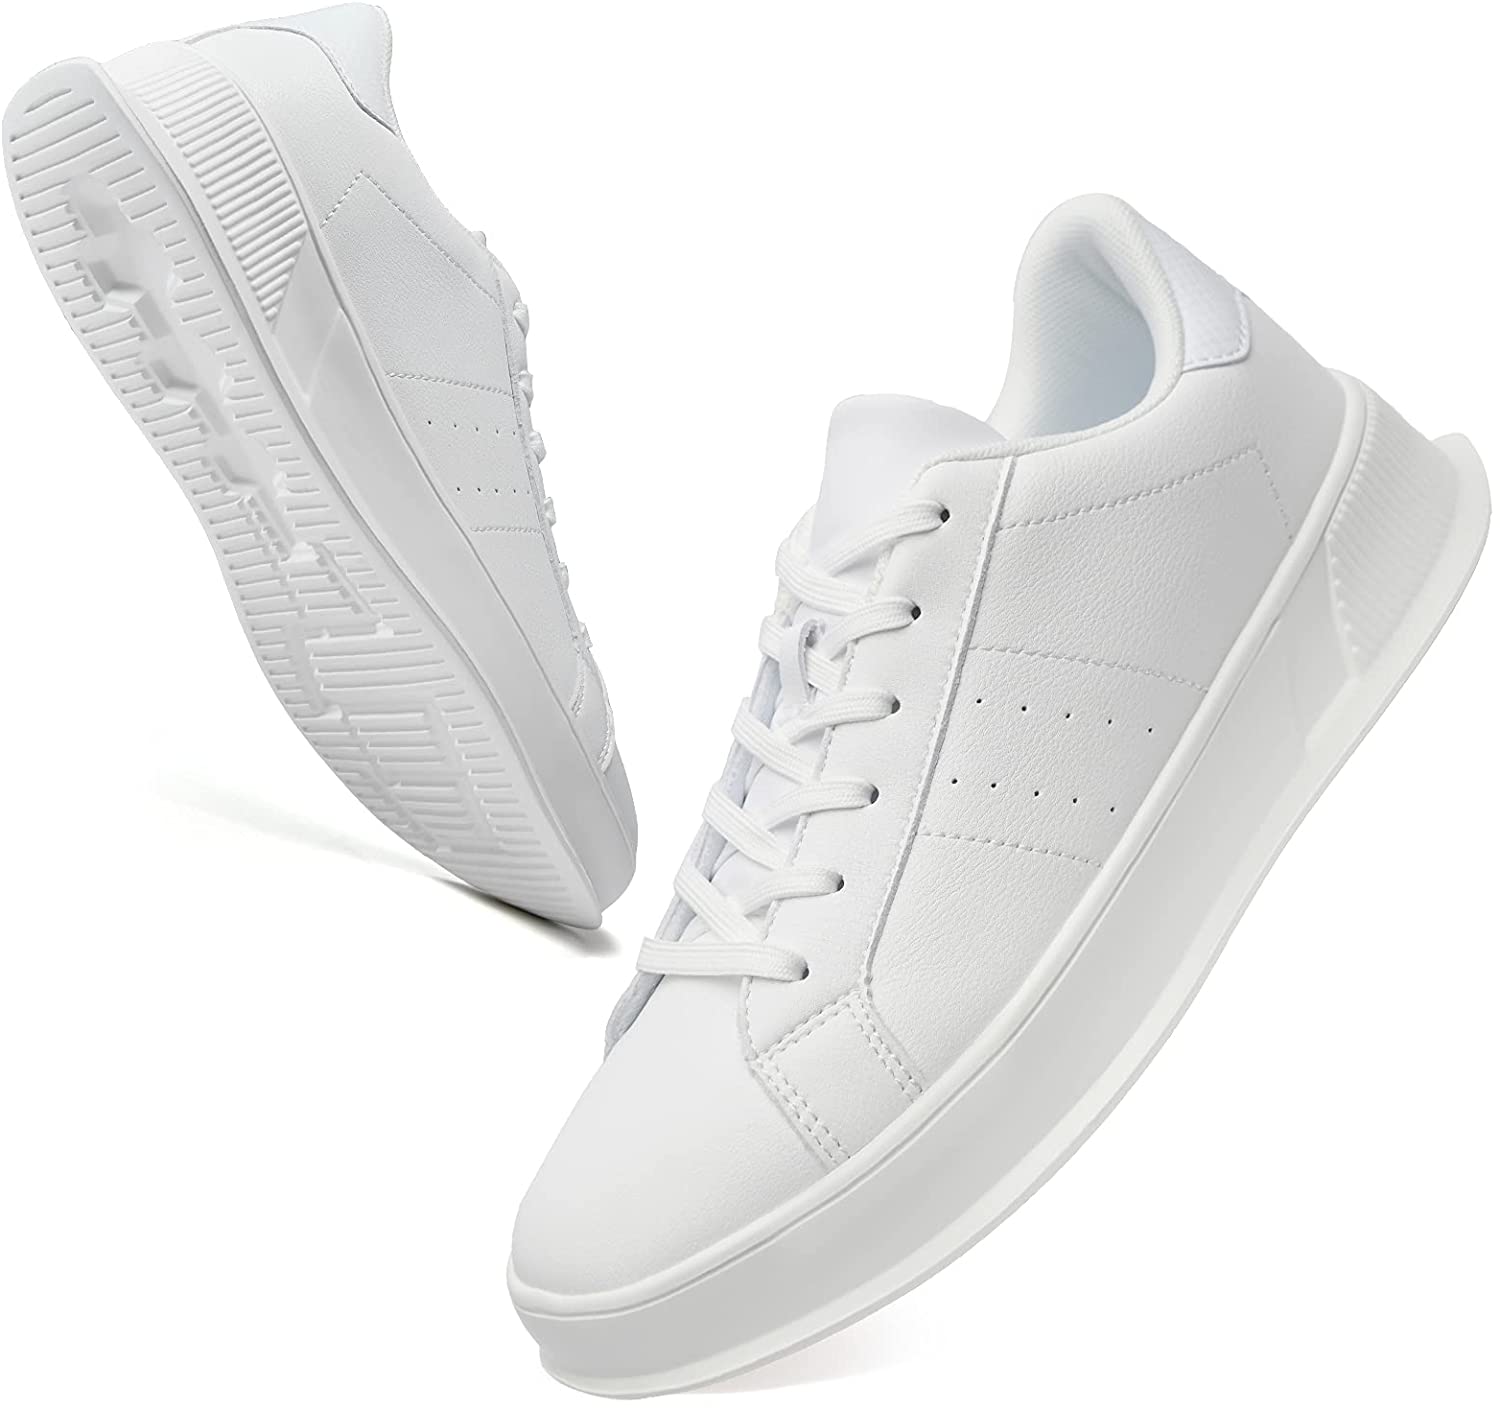 KPP Men's White Leather Sneakers Classic Walking Shoes Lightweight Comfort Lace up Fashion Sneakers 